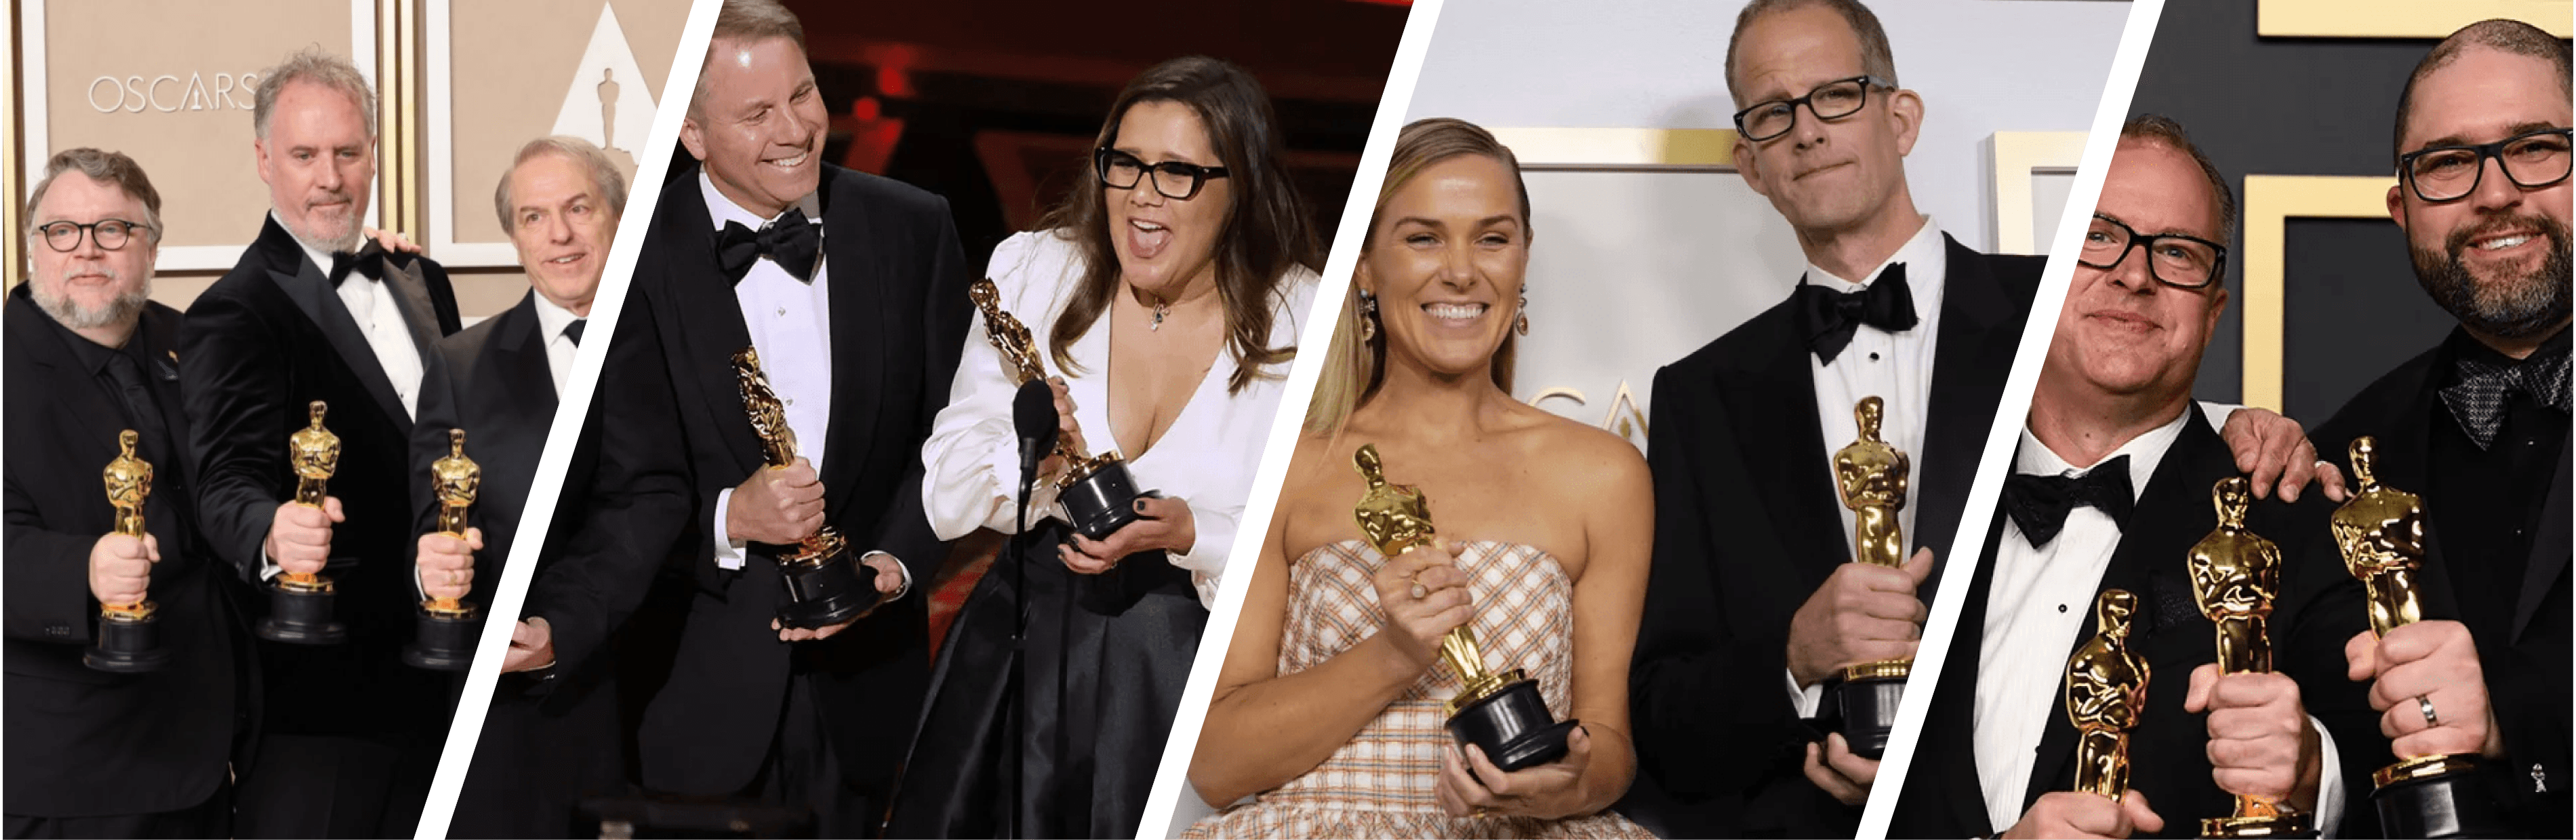 Photo depicts Oscar® winners from 2019-2023. Getty Images; Neilson Barnard/Getty Images; Pool via Getty Images; David Fisher/Shutterstock